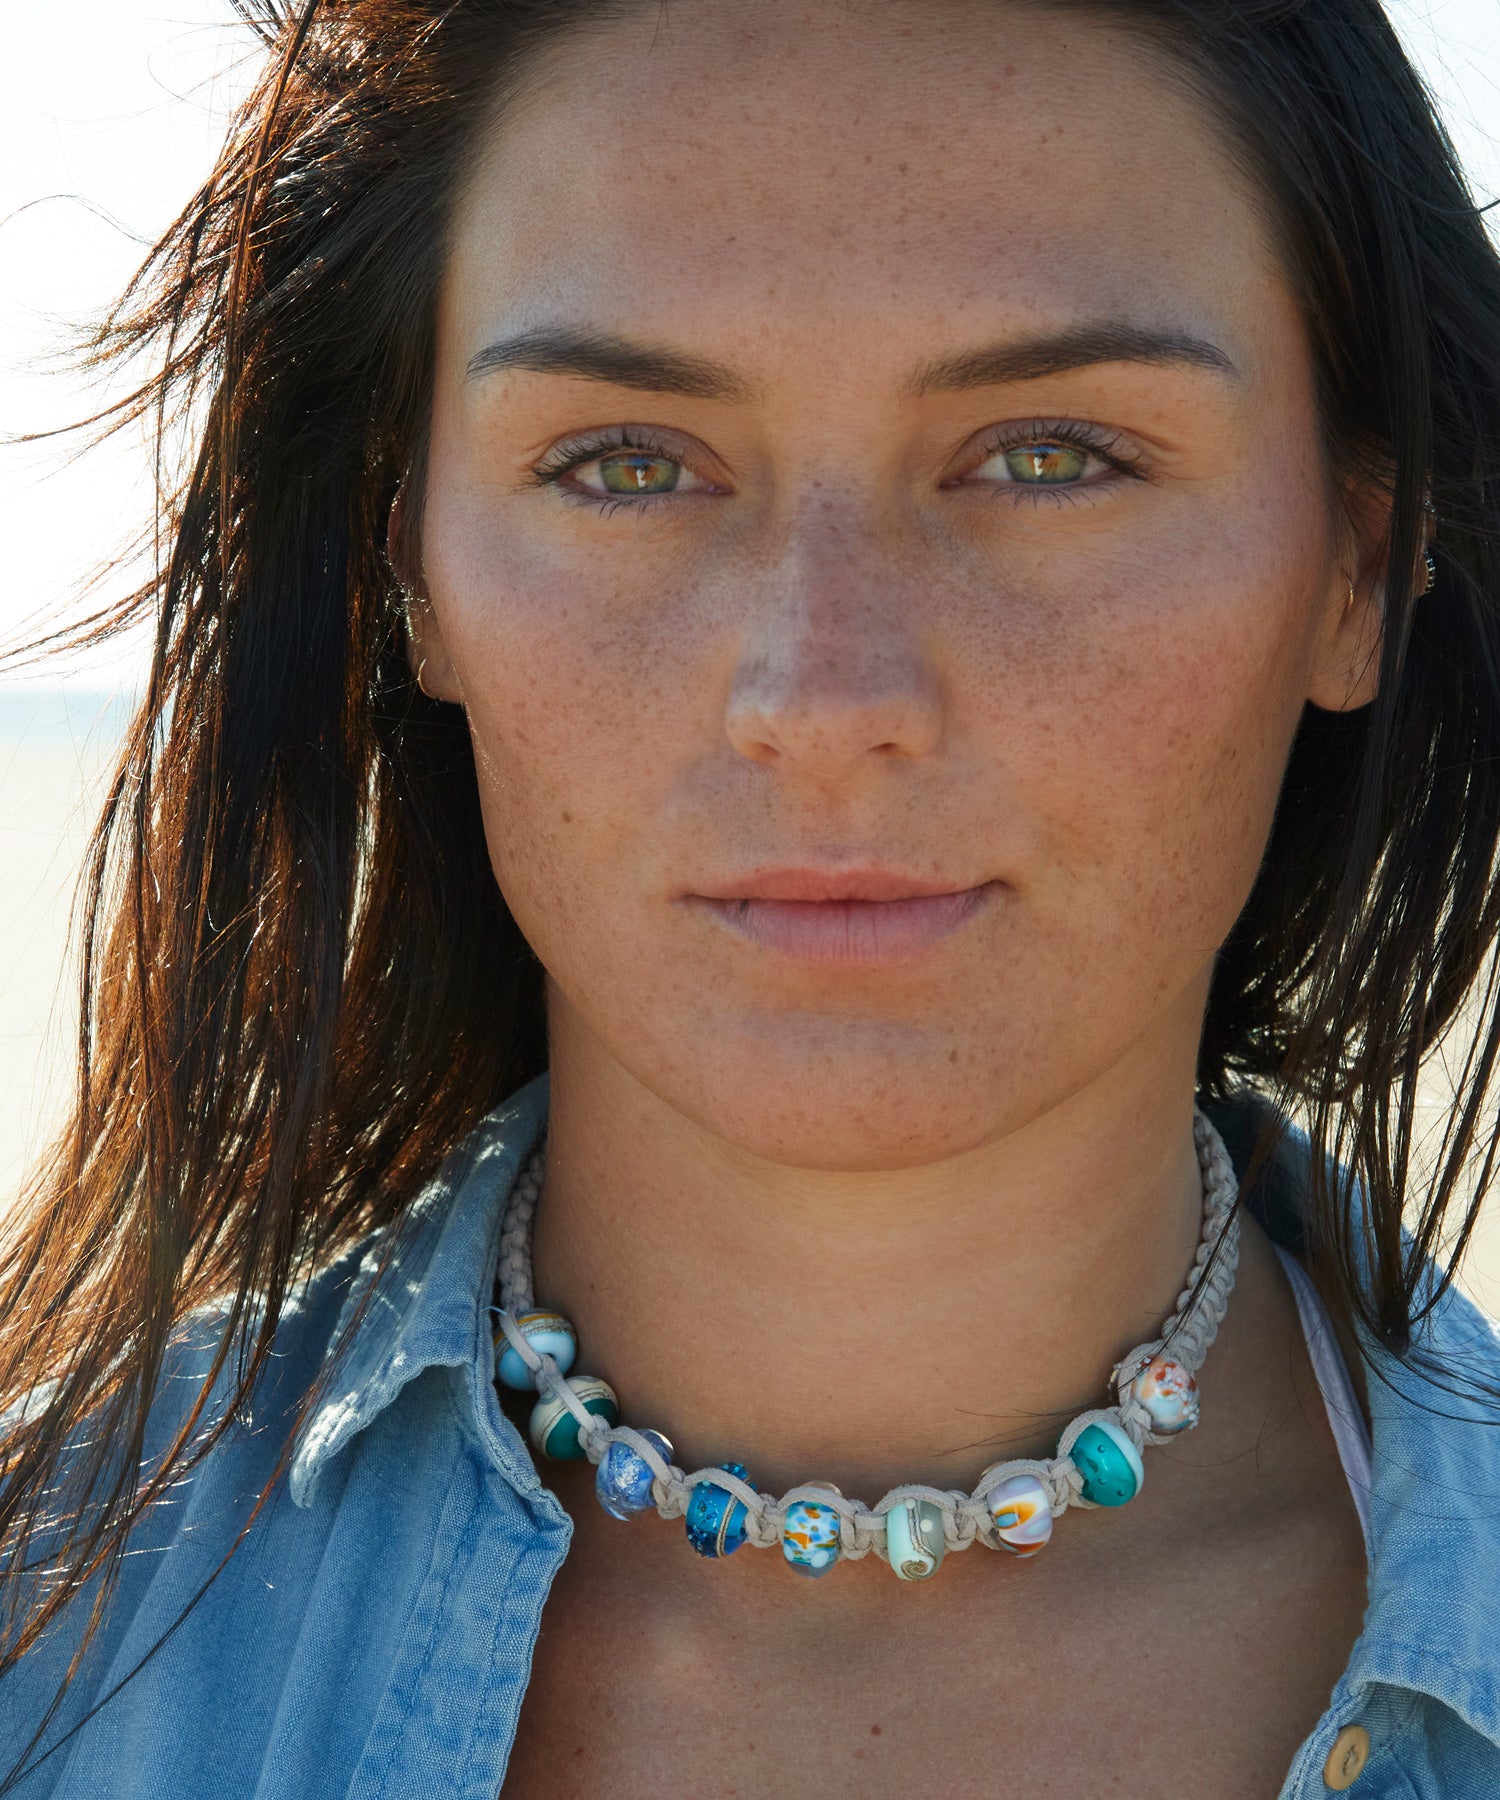 Grey macrame choker necklace made with colourful glass surf beads worn by woman in denim jacket.